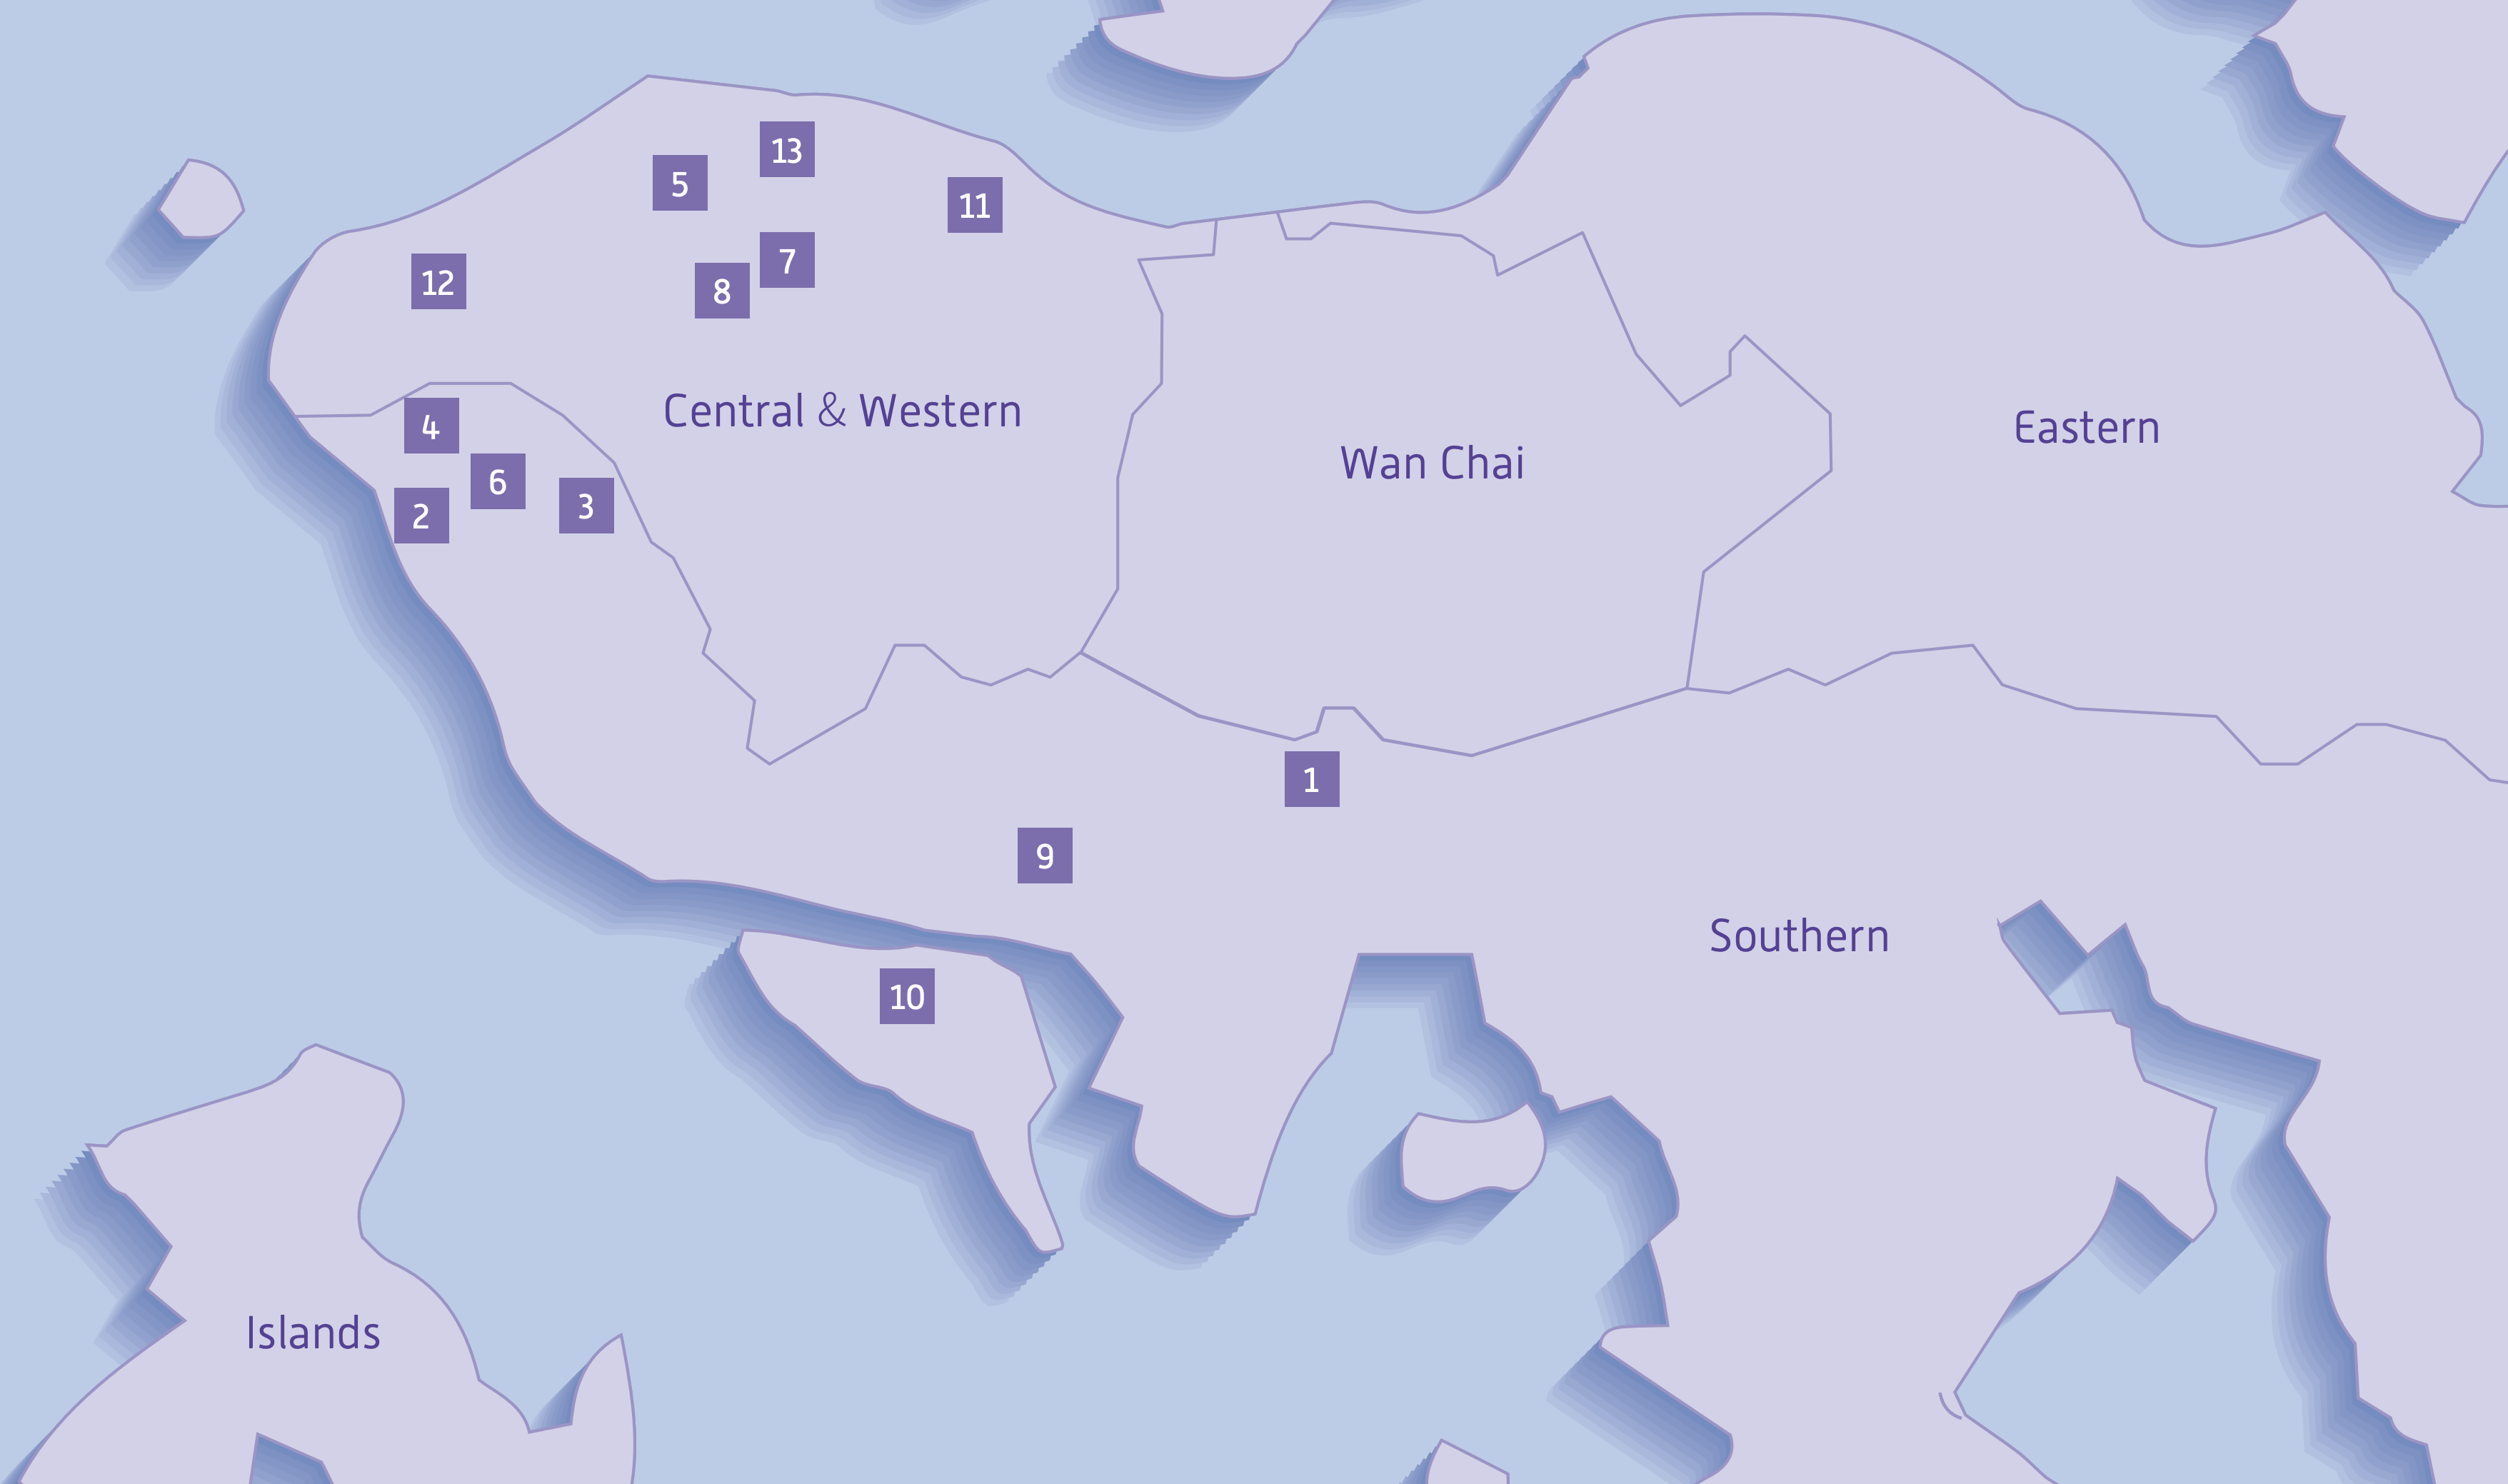 There are seven hospitals and six general out-patient clinics or rehabilitation centre in Hong Kong West Cluster. They are situated at different locations in the Central and Western Districts and the Southern Districts.